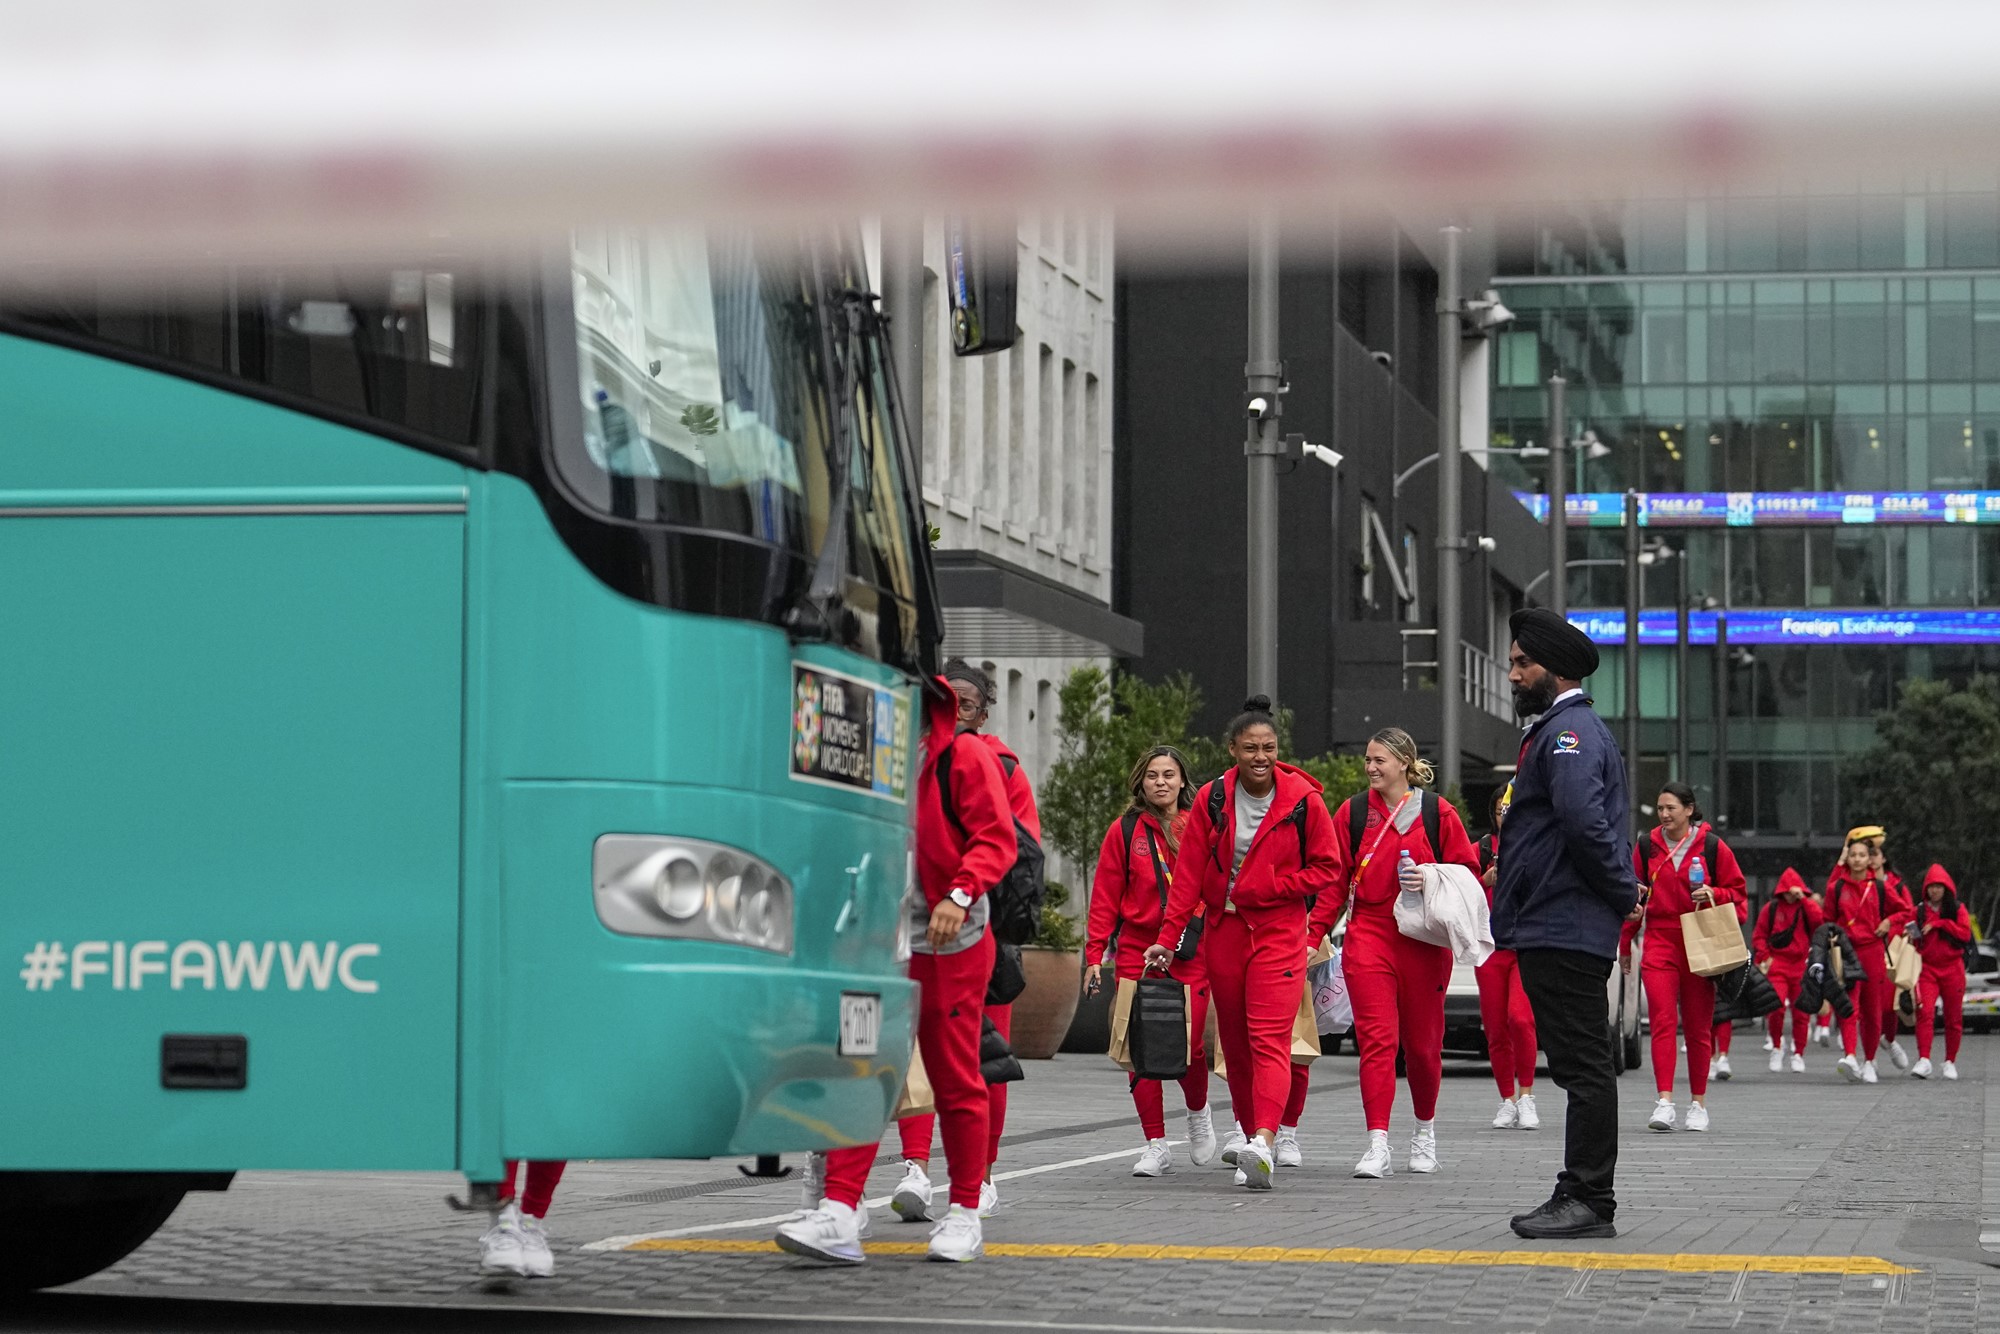 Around a dozen women in red track suits walk across the city centre onto a green bus marked FIFAWWC